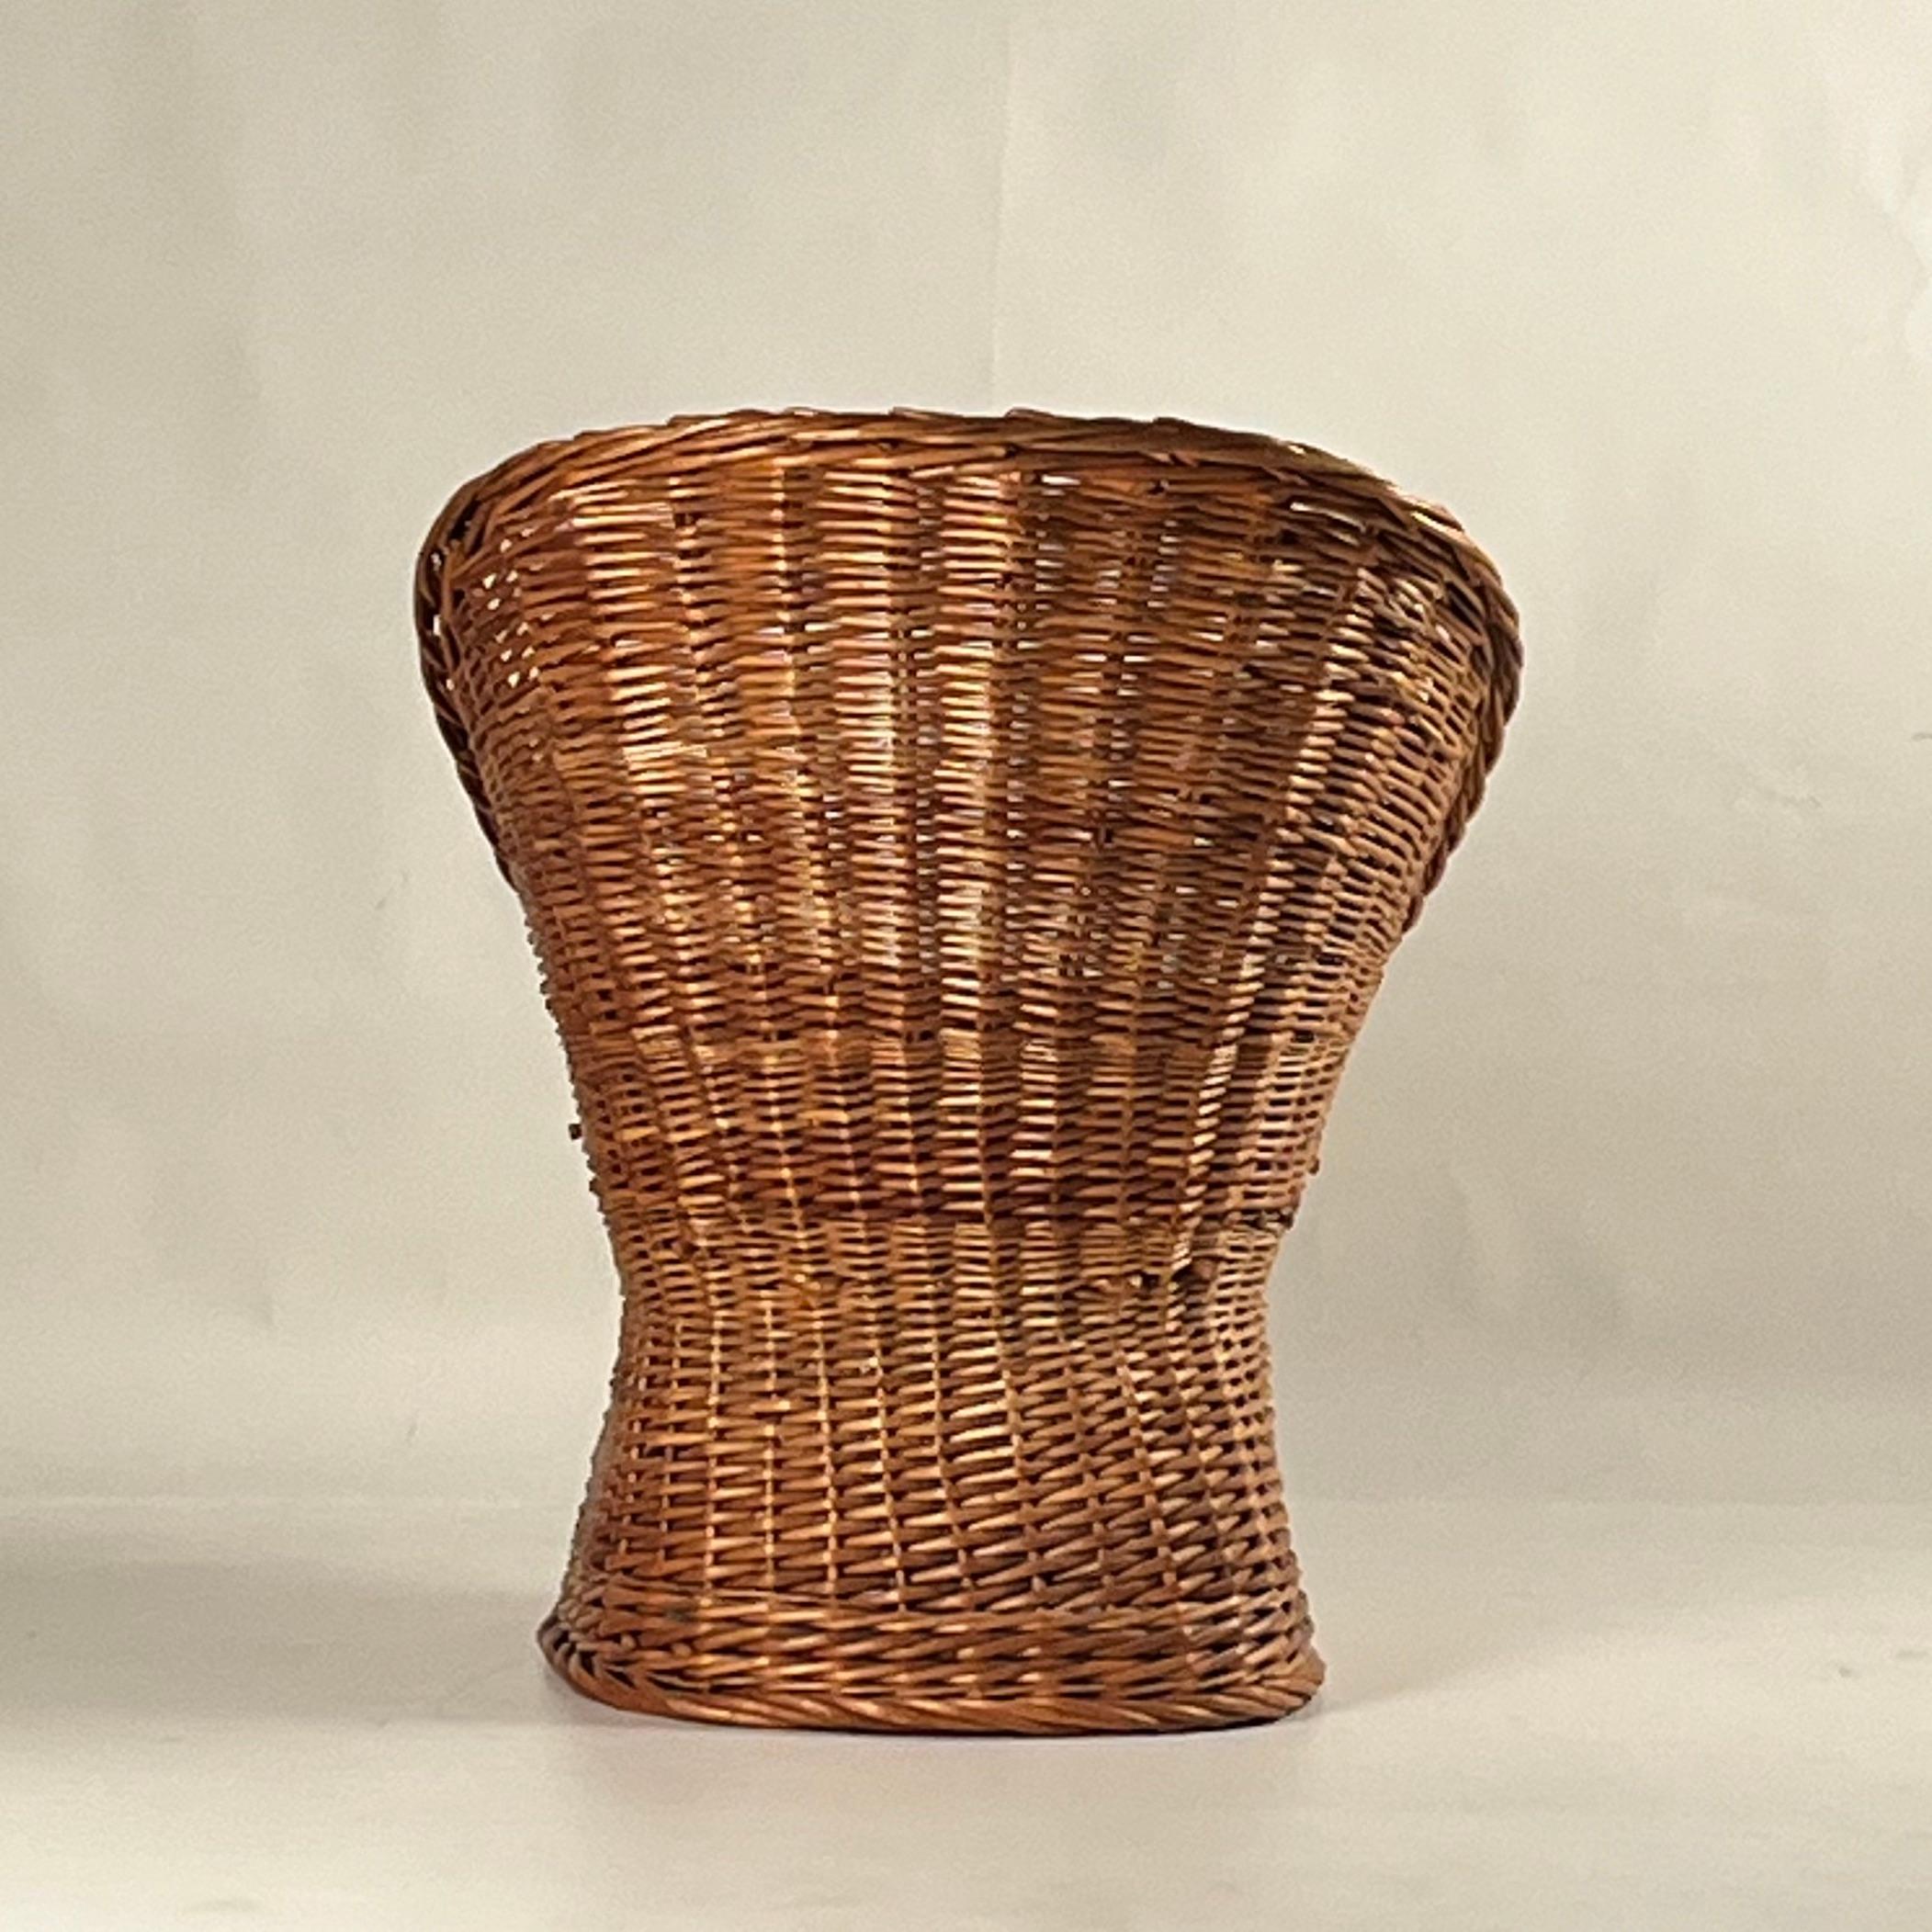 Woven Rattan Wicker Barrel Chair with Shearling Pad For Sale 2